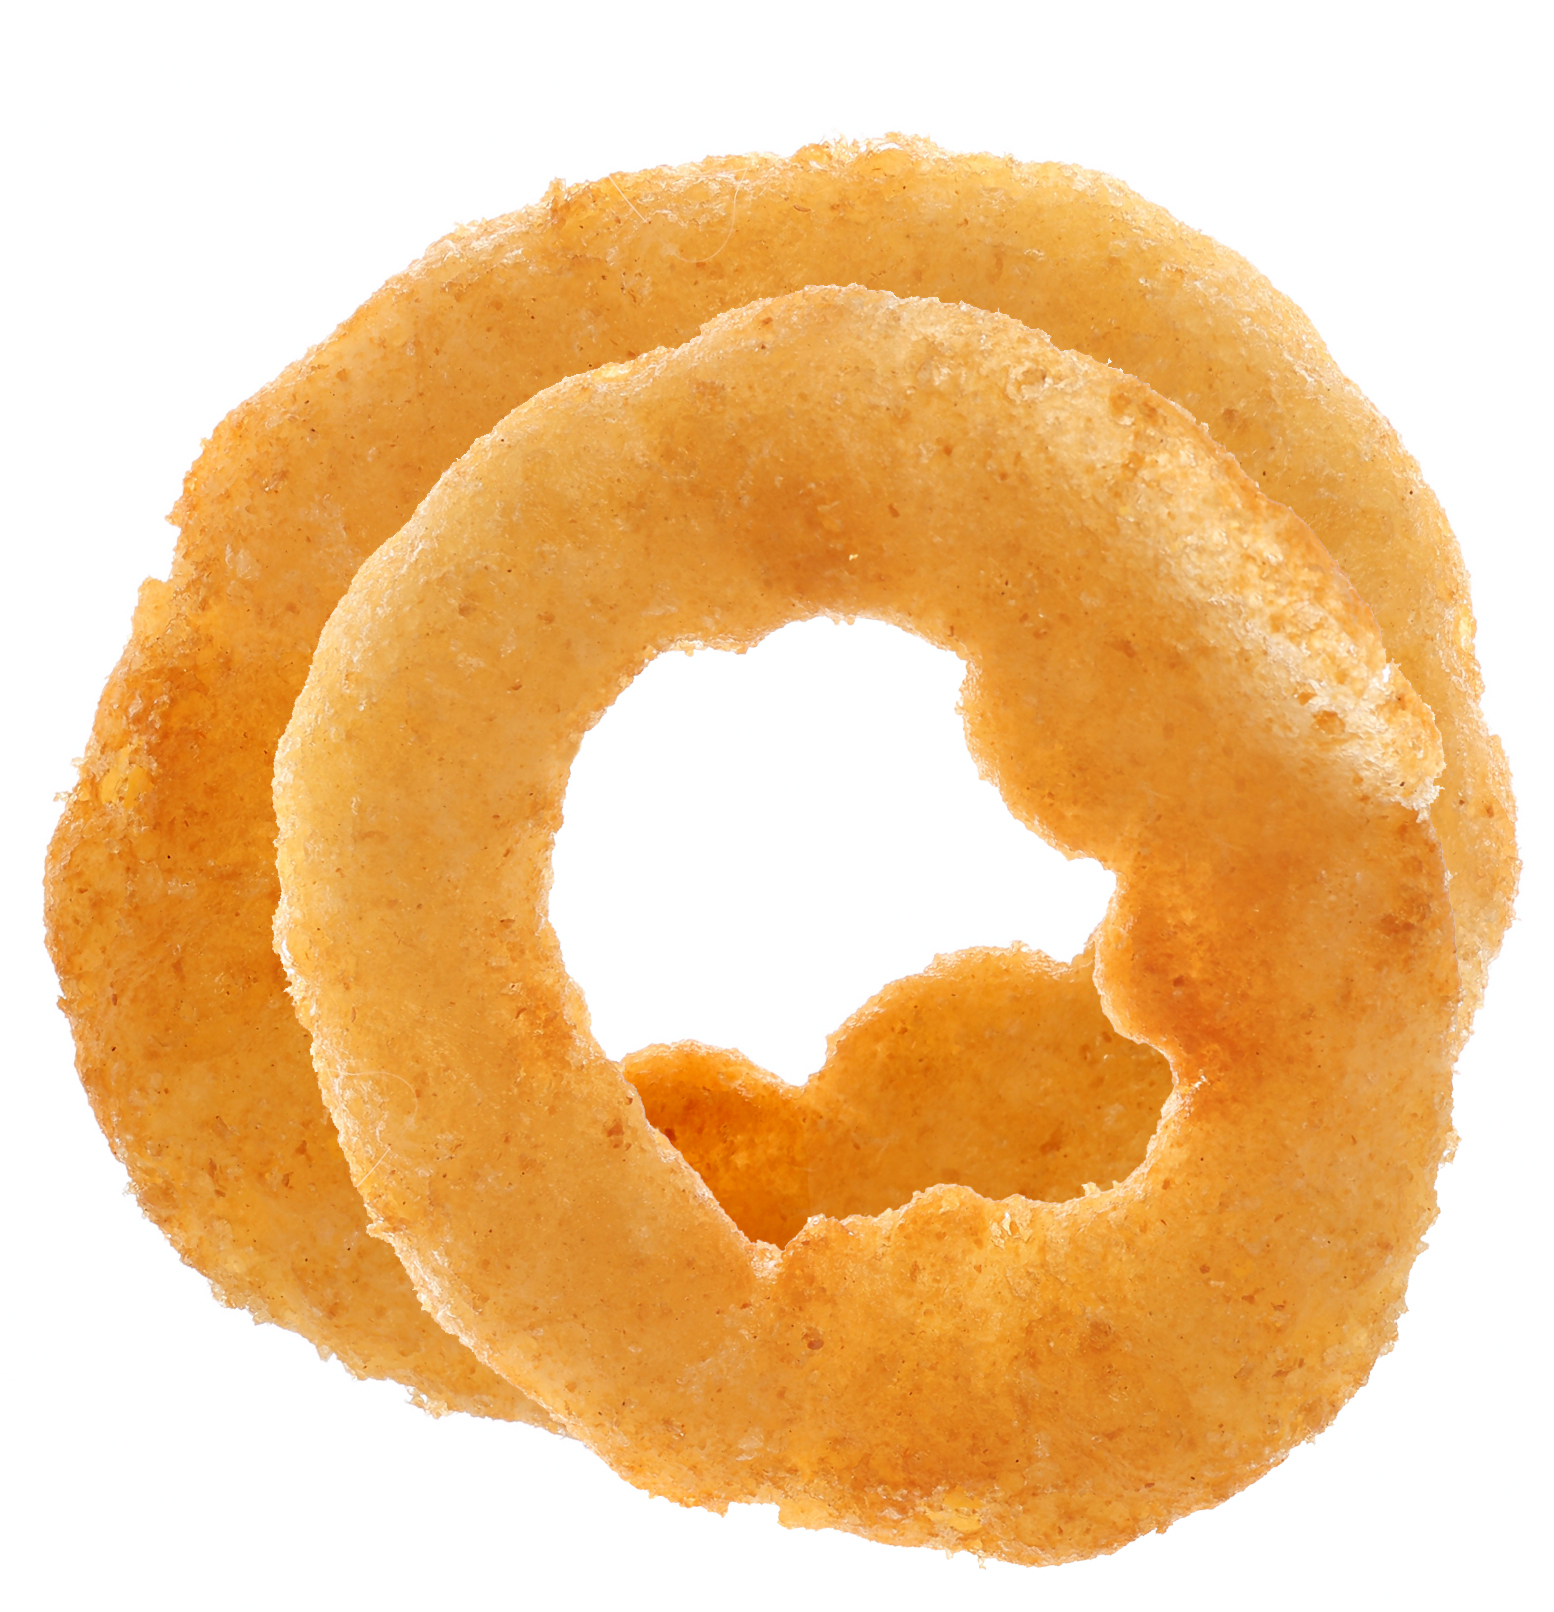 Onion rings - Picture of Dairy Queen Grill & Chill, Edmonton - Tripadvisor